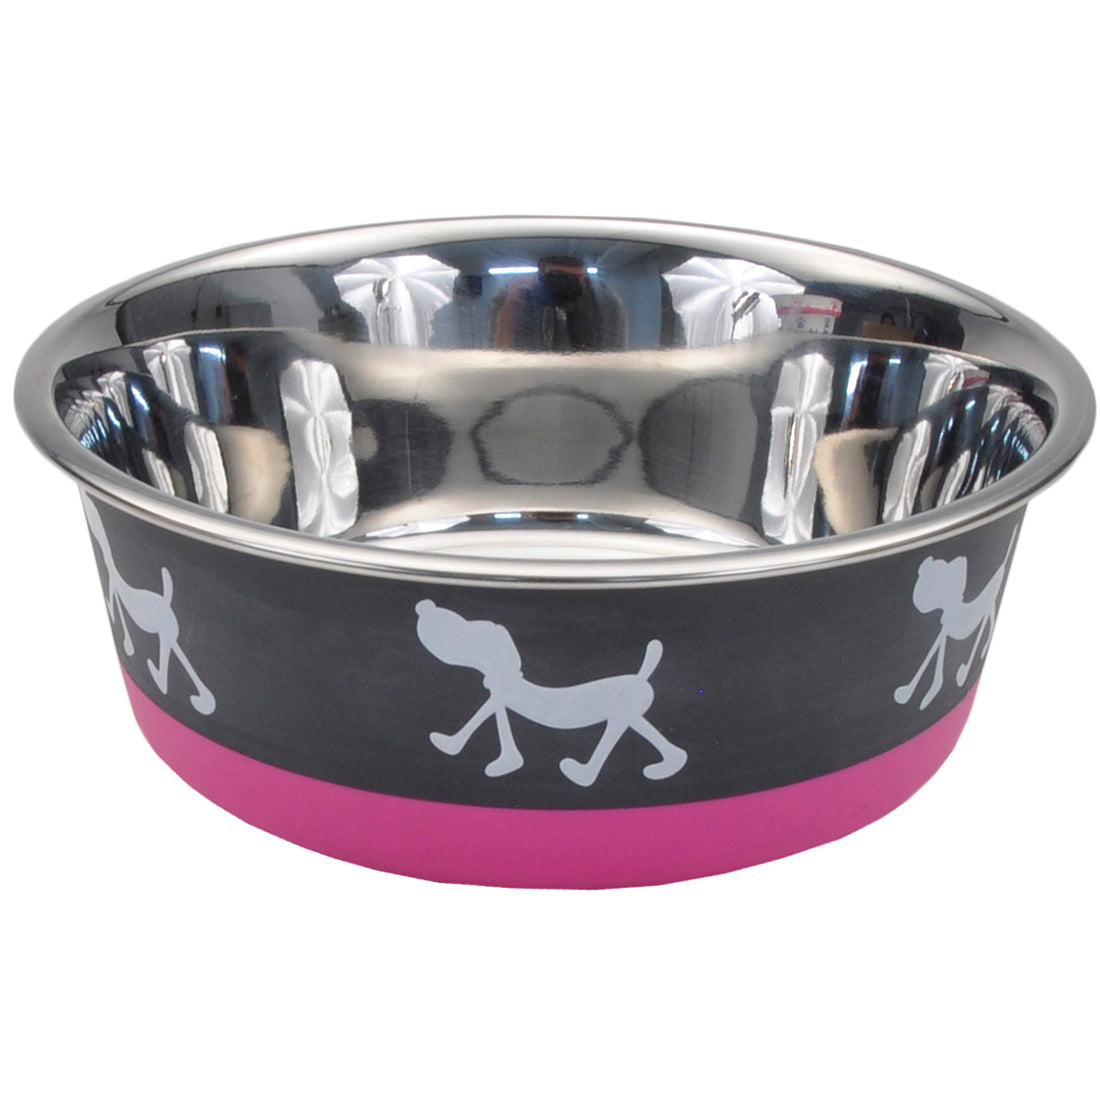 Non-Skid Pup Design Dog Bowls by Maslow, Pink